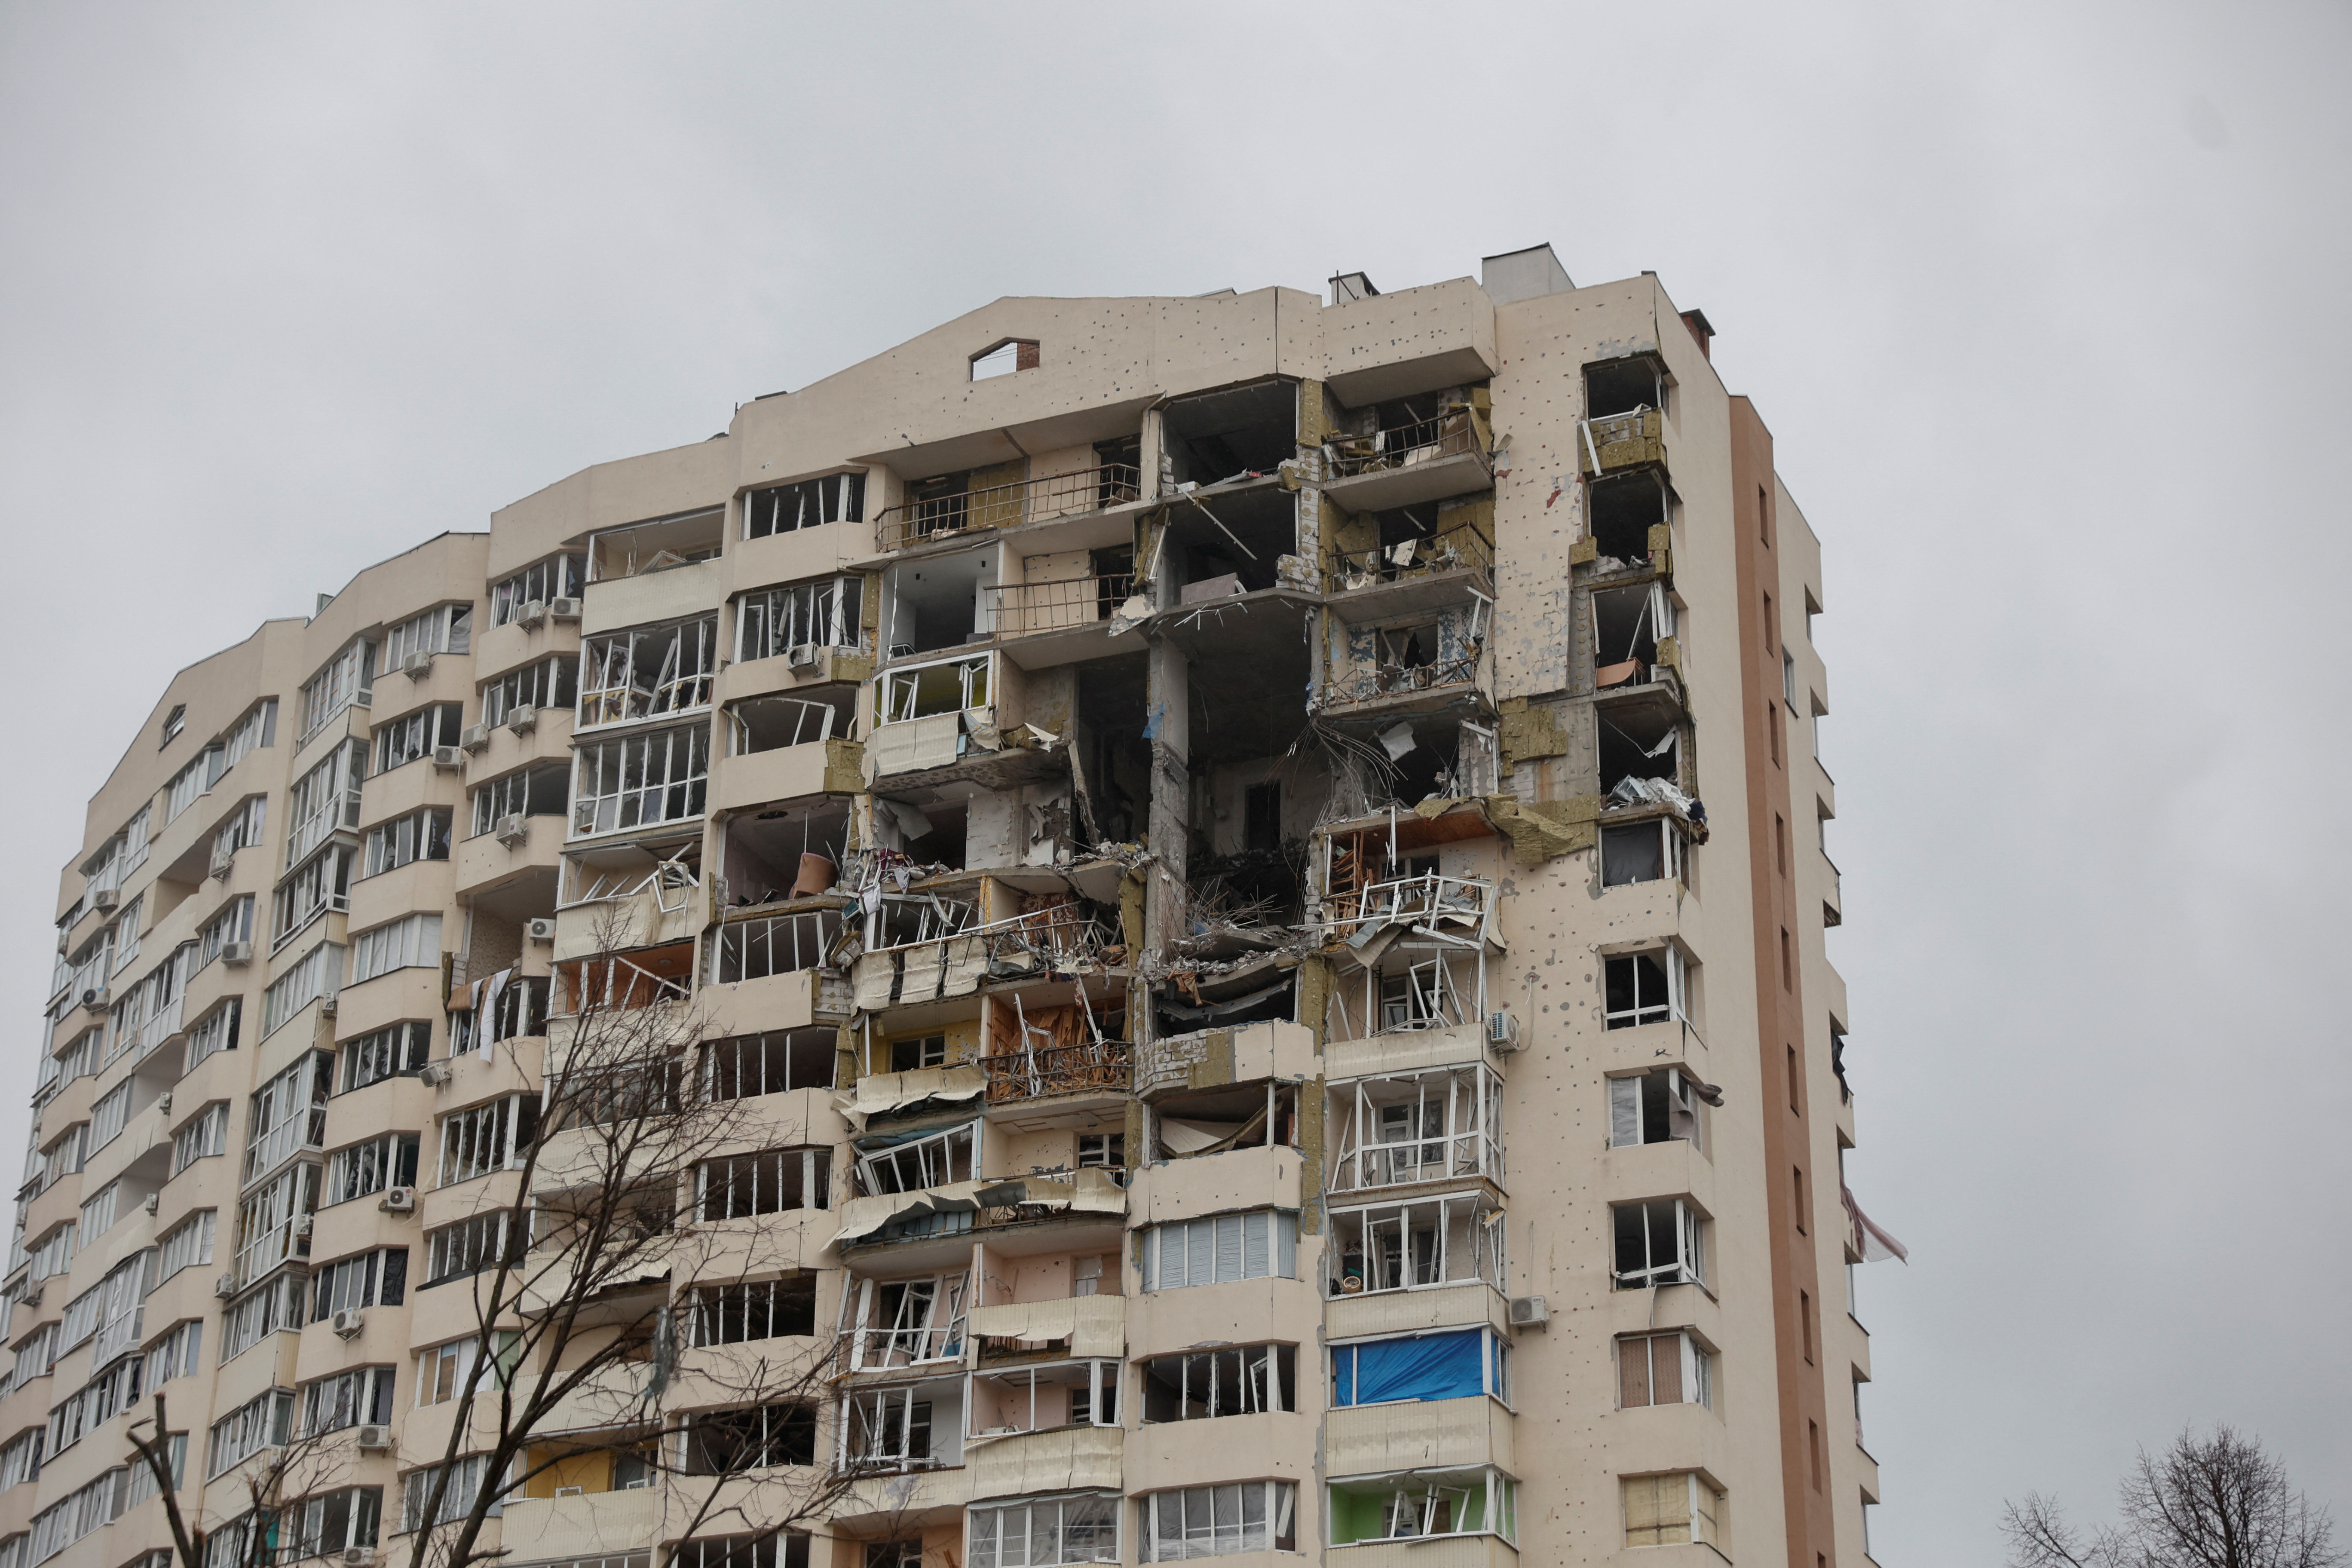 A view shows an apartment building damaged by heavy shelling in Chernihiv